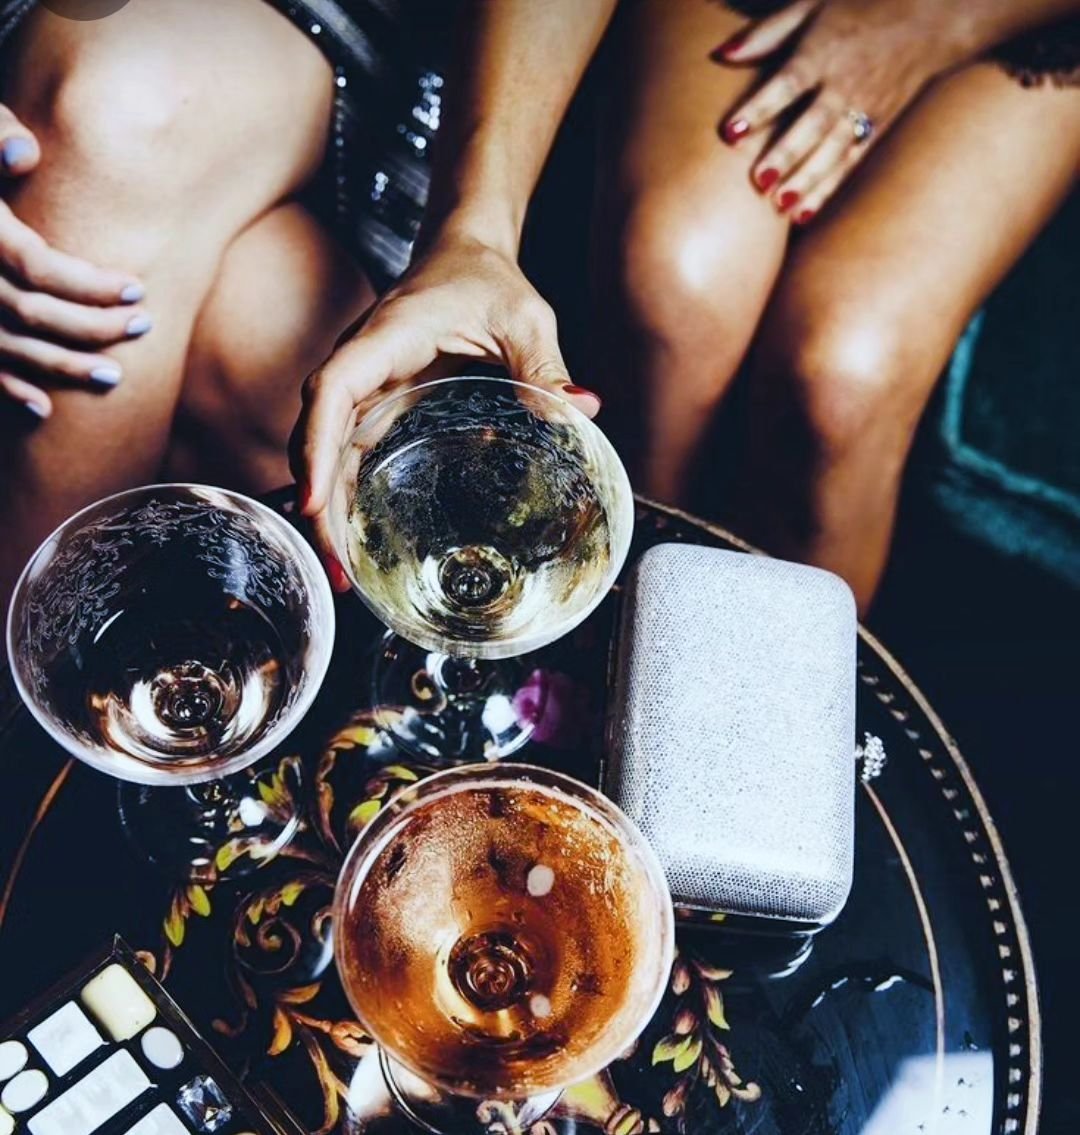 WHAT A TIME TO BE A VIBE

Curated for the socializers, cocktail forward, late night revelers, and everyone in between - SIP is just the vibe you need.

Friday + Saturday 
6pm - 1am
DJ @firstclassdjsindy 9PM both nights.

#meetyouatsip #sipcocktailson